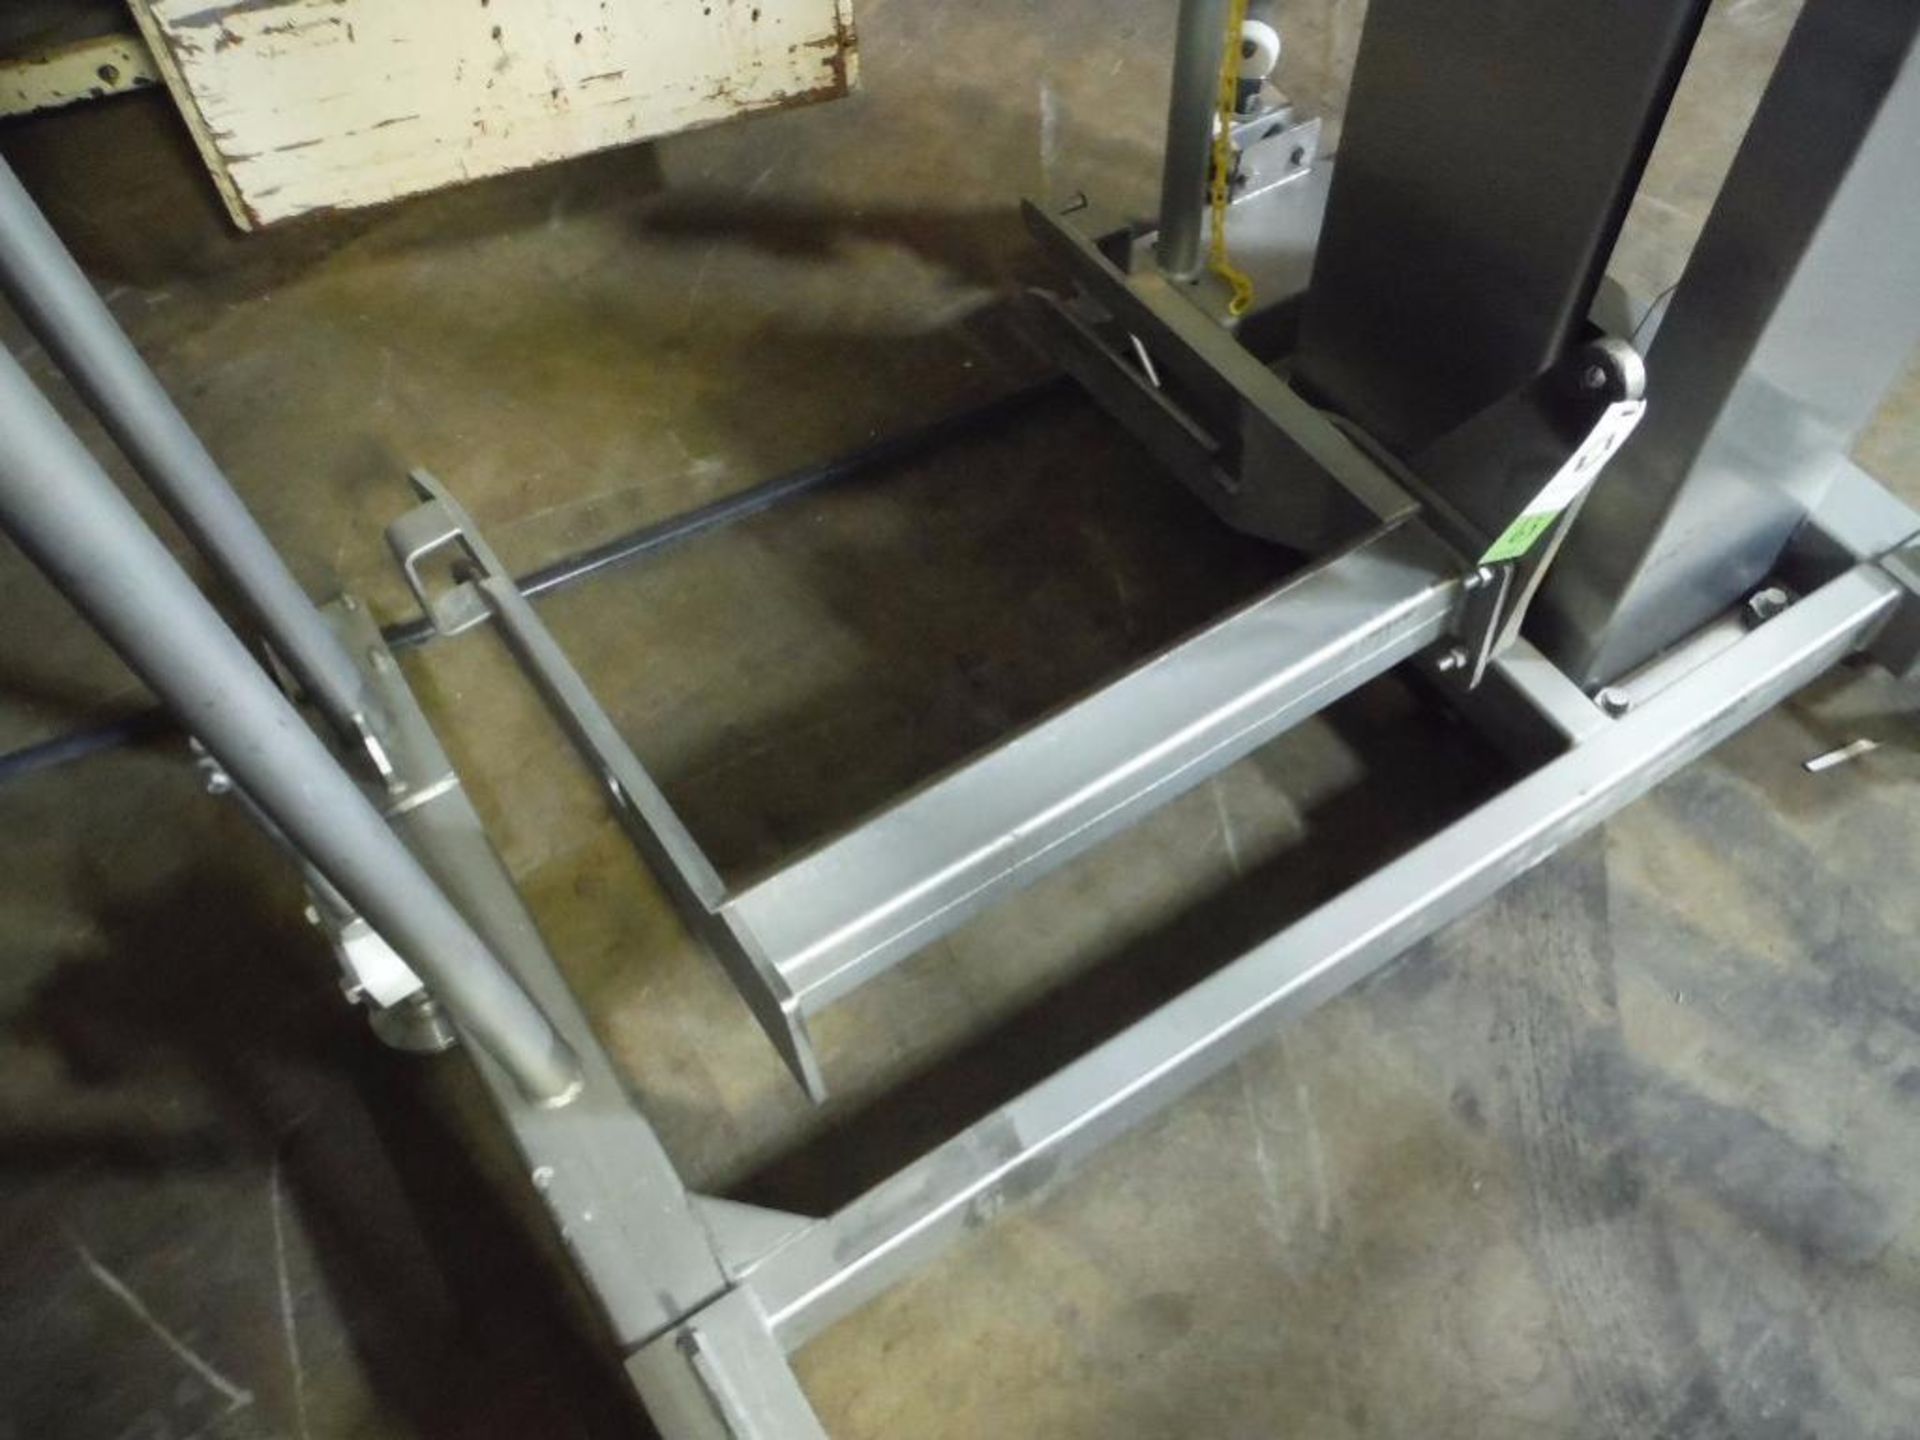 MTC SS bowl lift, Model HLC-2, SN 622262, 113 in. lift, capacity 800 lbs. ** Rigging Fee: $ 200** (L - Image 2 of 7